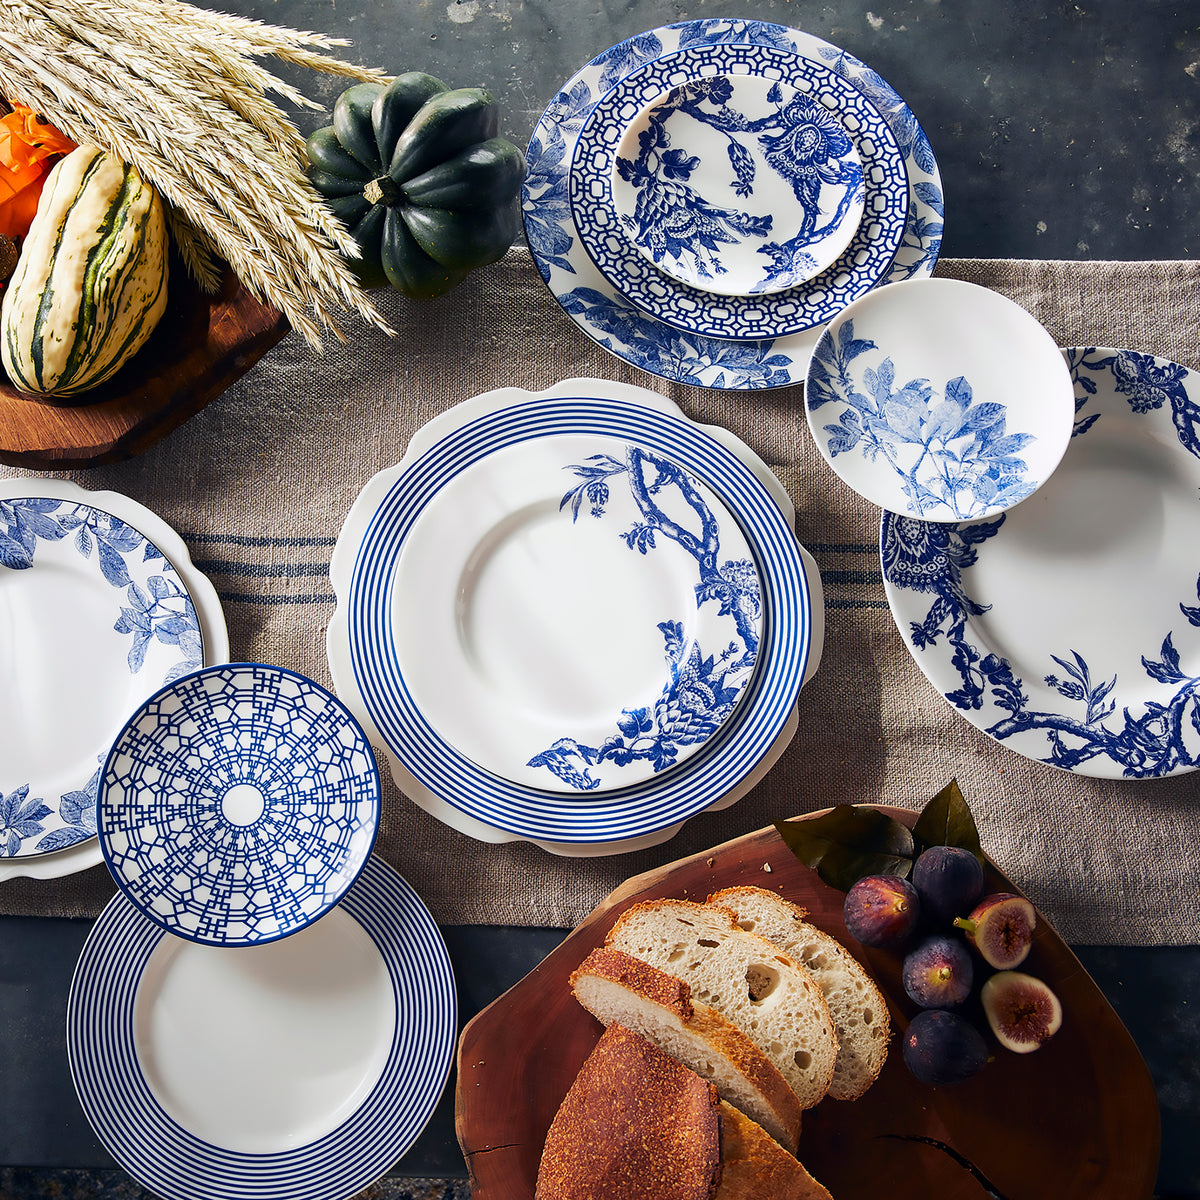 A Caskata Artisanal Home Newport Racing Stripe Rimmed Dinner Plate in blue and white adorned with fruit and bread.